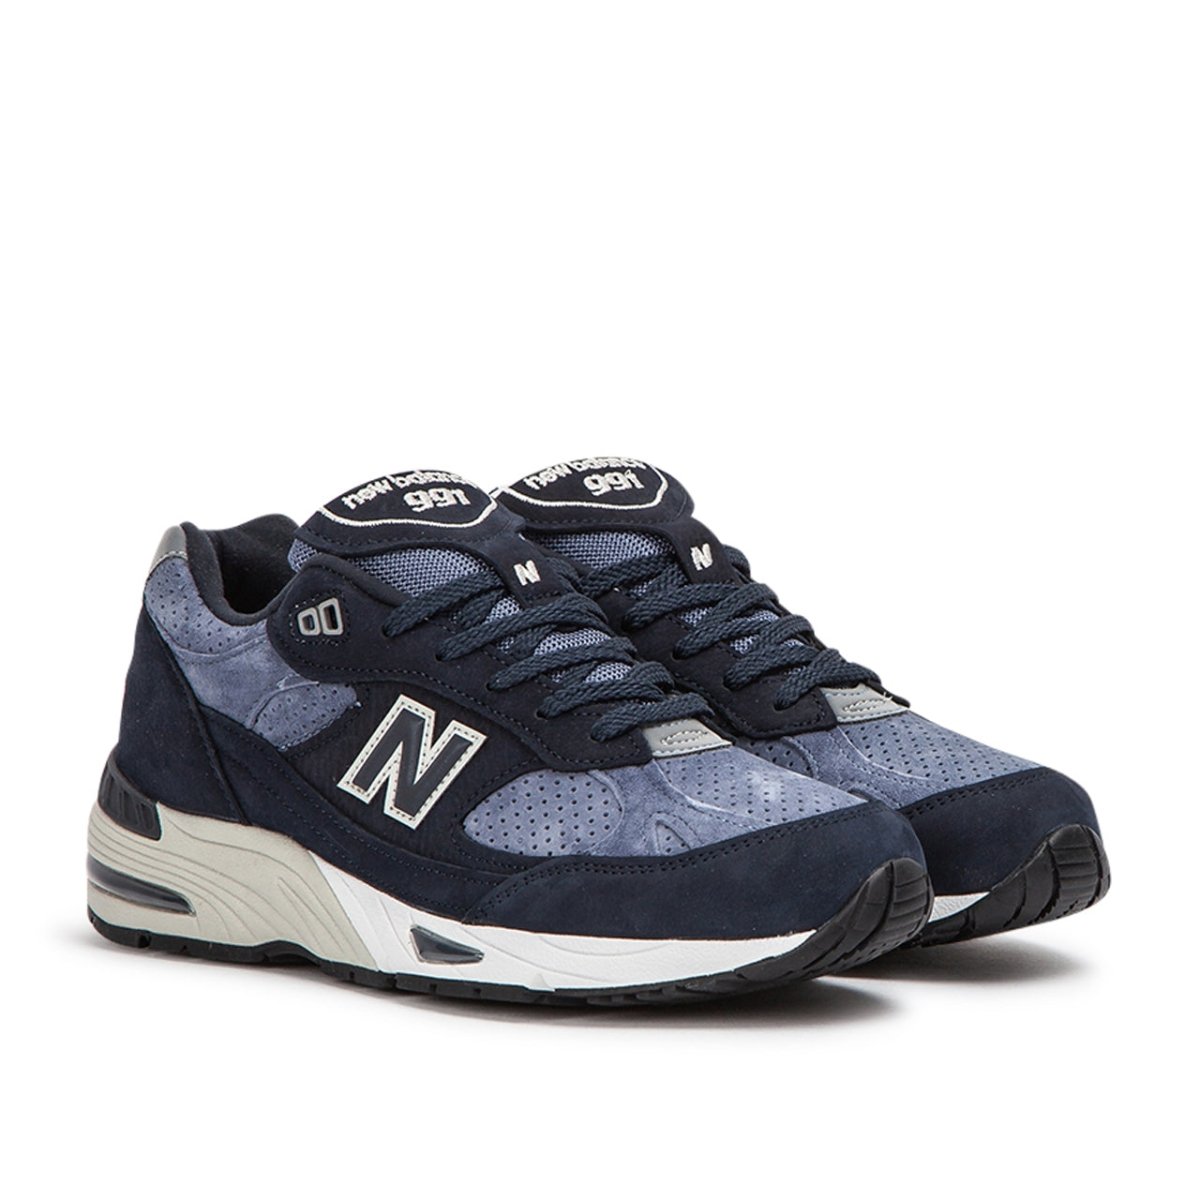 New Balance M991 NVB 'Made in England' (Navy)  - Allike Store